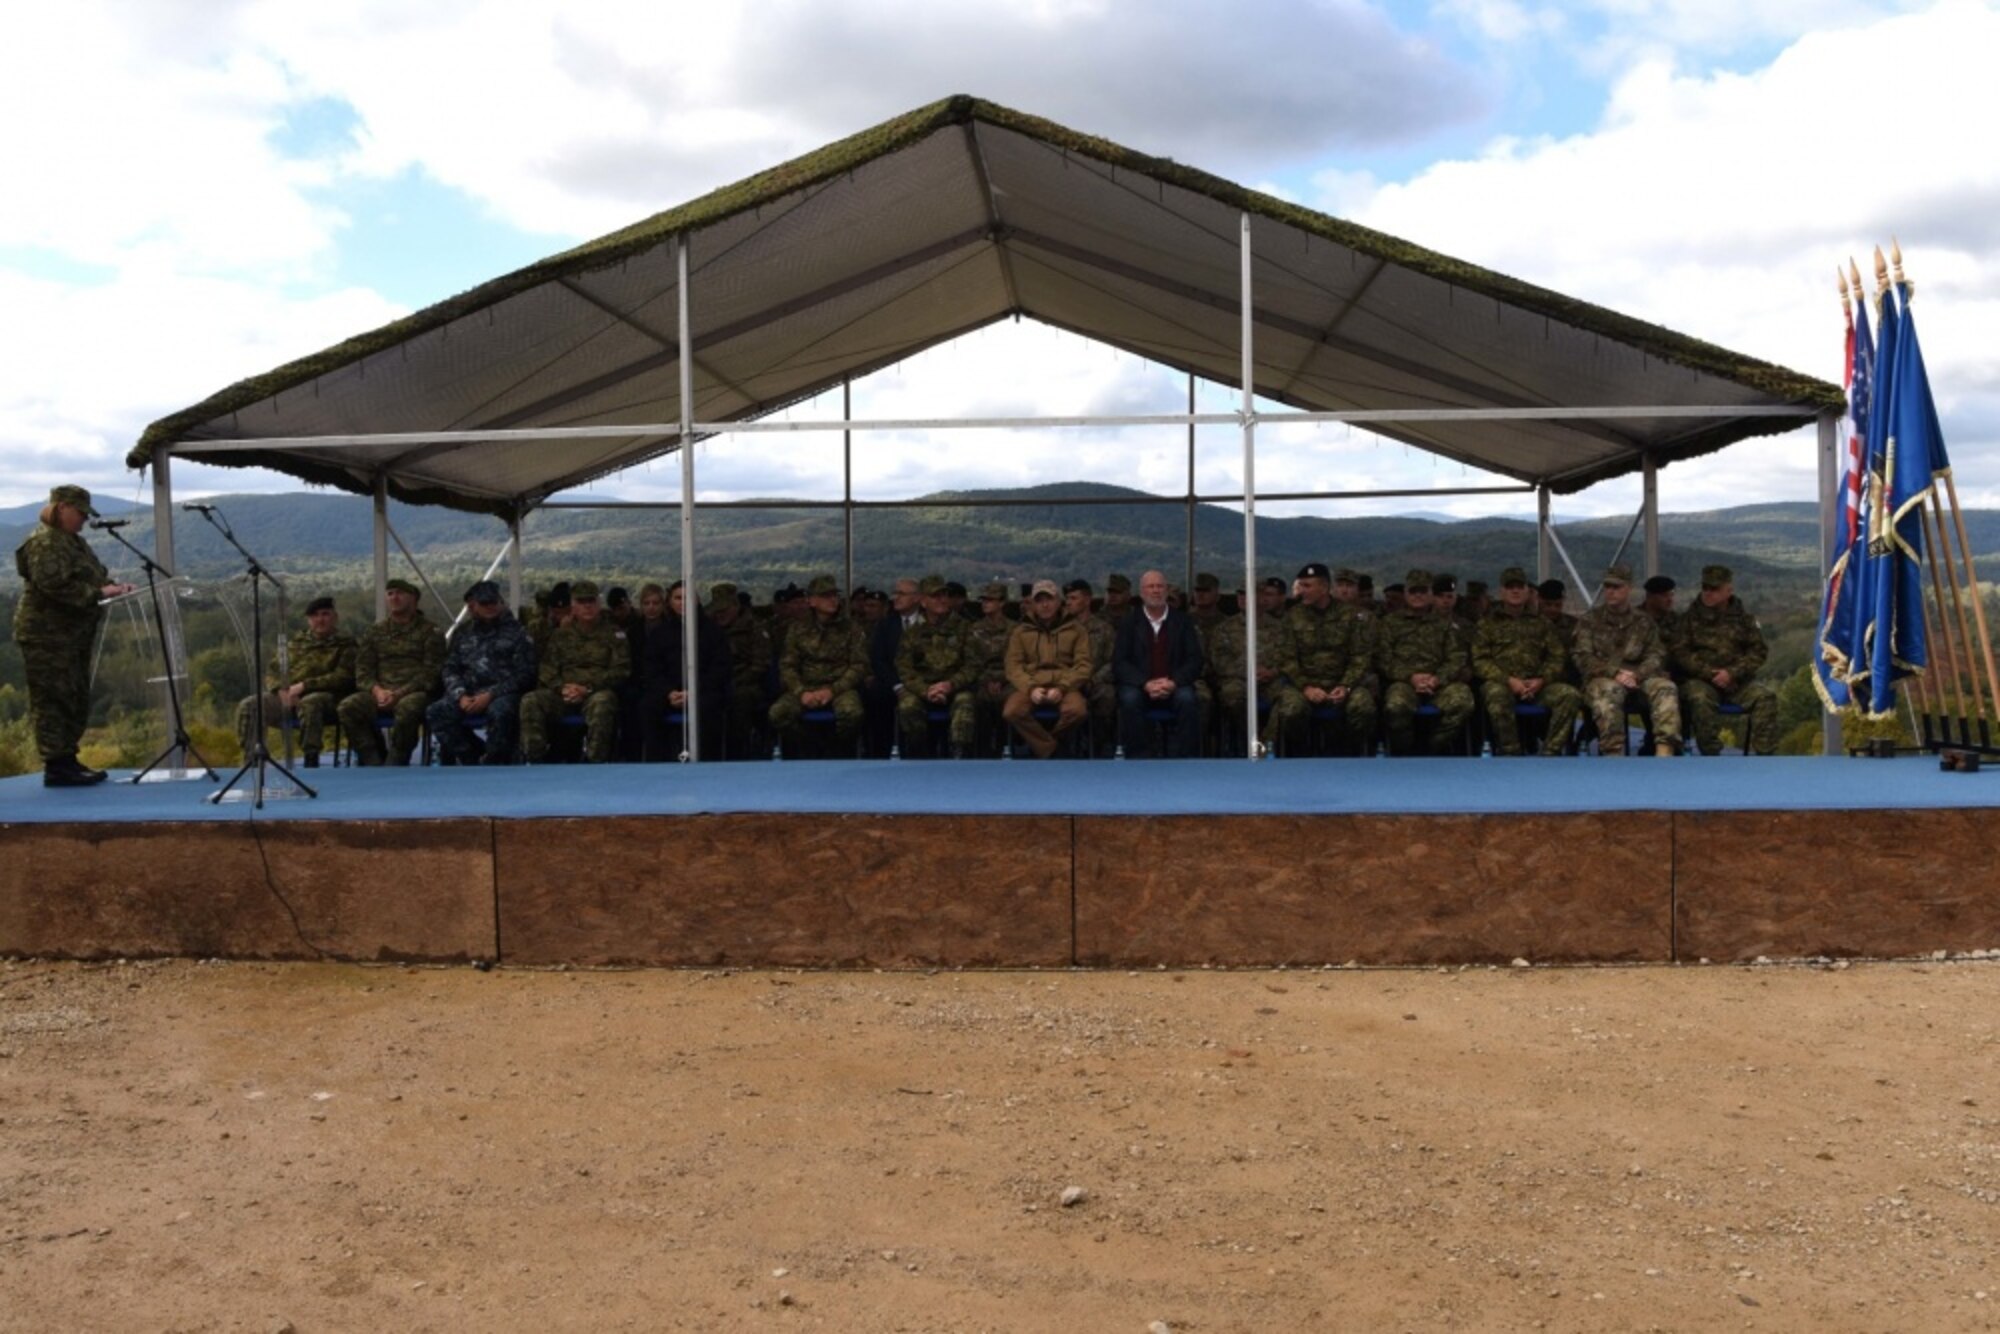 Robert Kohorst, U.S. ambassador to Croatia, sits with Croatia Minister of Defense and Croatian military forces, during the grand opening of a range observation tower ceremony at Slunj Training Area, Croatia, Oct. 4, 2019. To honor the new construction project several Croatian military members in attendance as well as Croatia’s minister of defense, army commander and chief of general staff. (U.S. photo by Senior Airman Milton Hamilton)